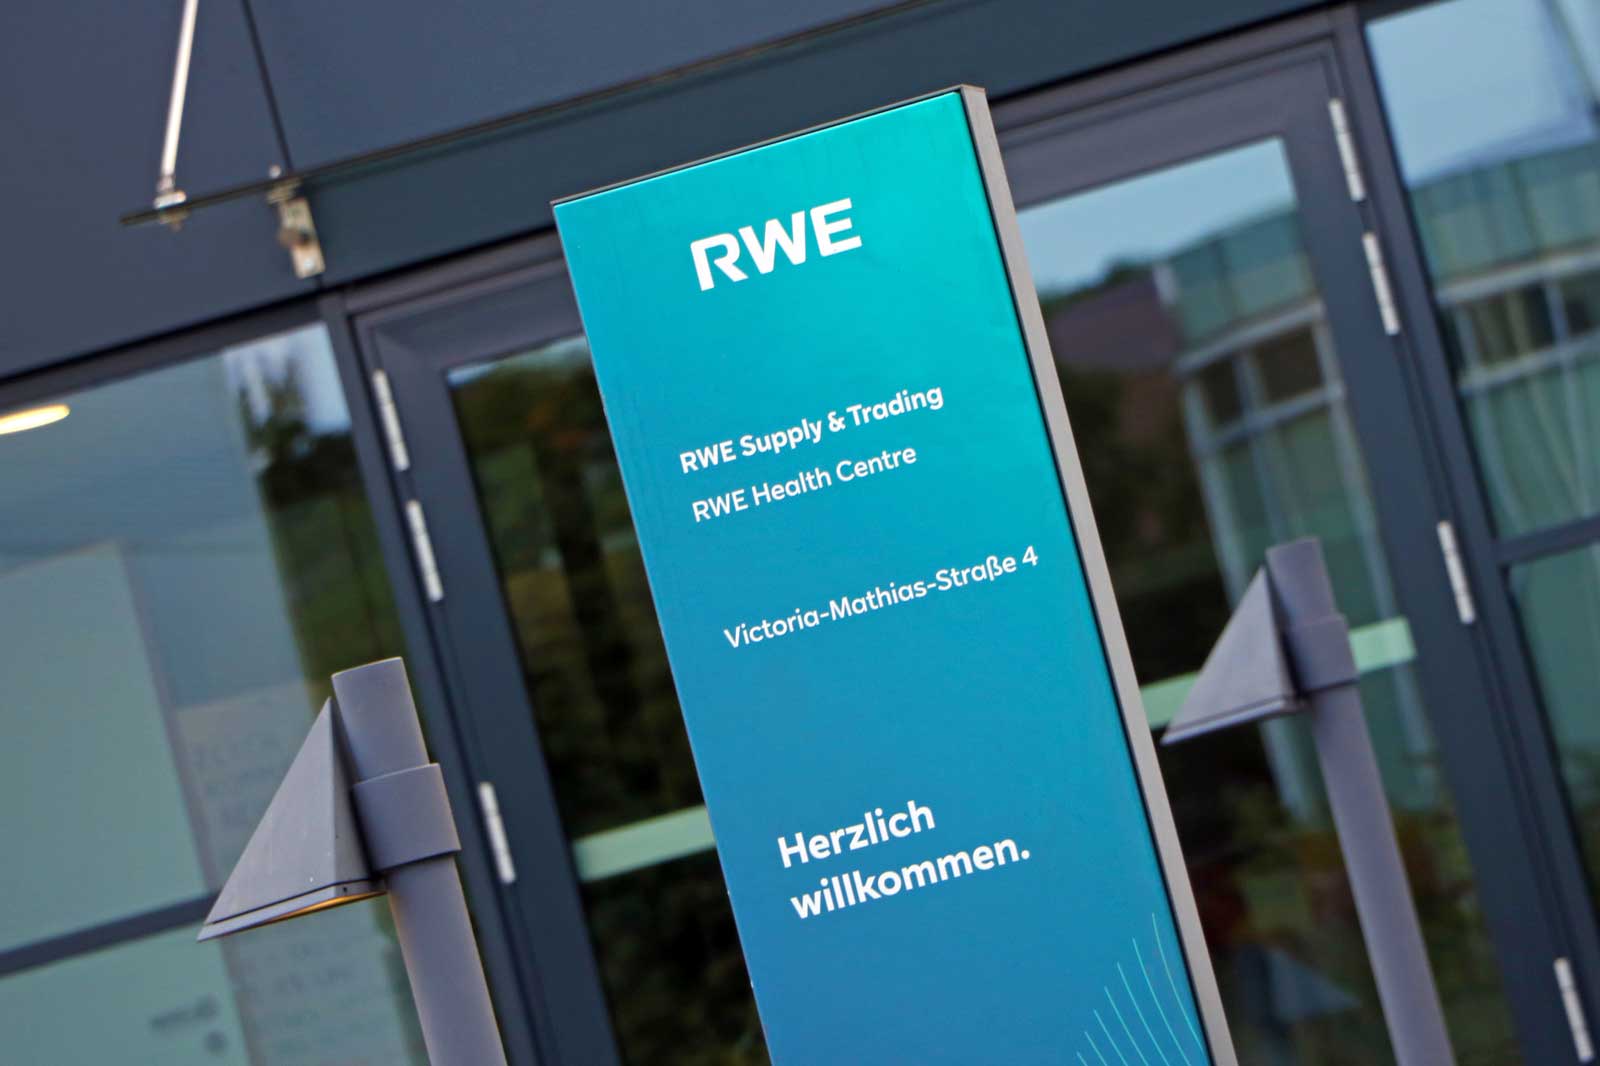 Entrance to health care center at the RWE Campus in Essen